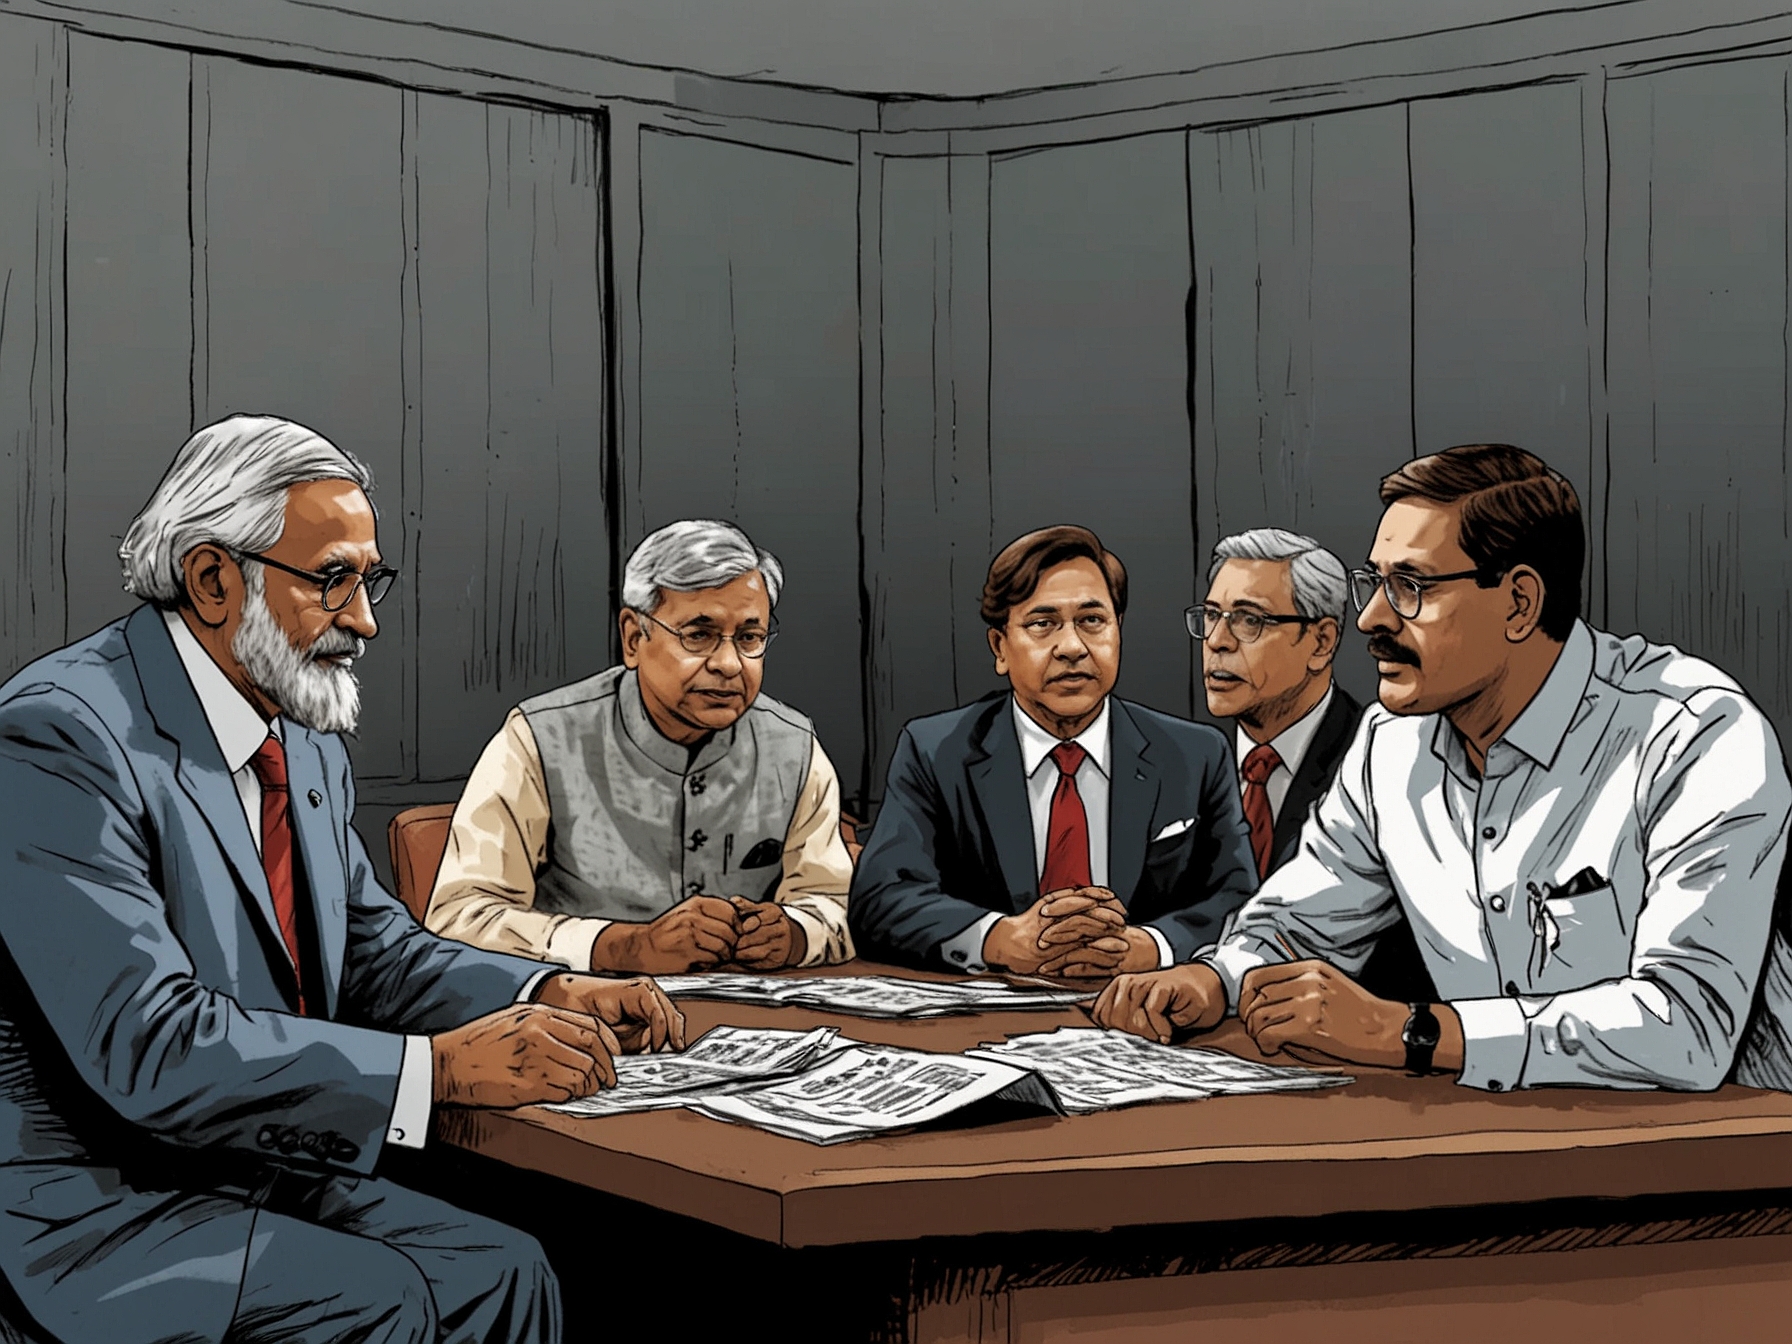 An image showing a heated political discussion on Indian news channels, with headlines about the alleged EVM unlocking and various political experts debating the issue.